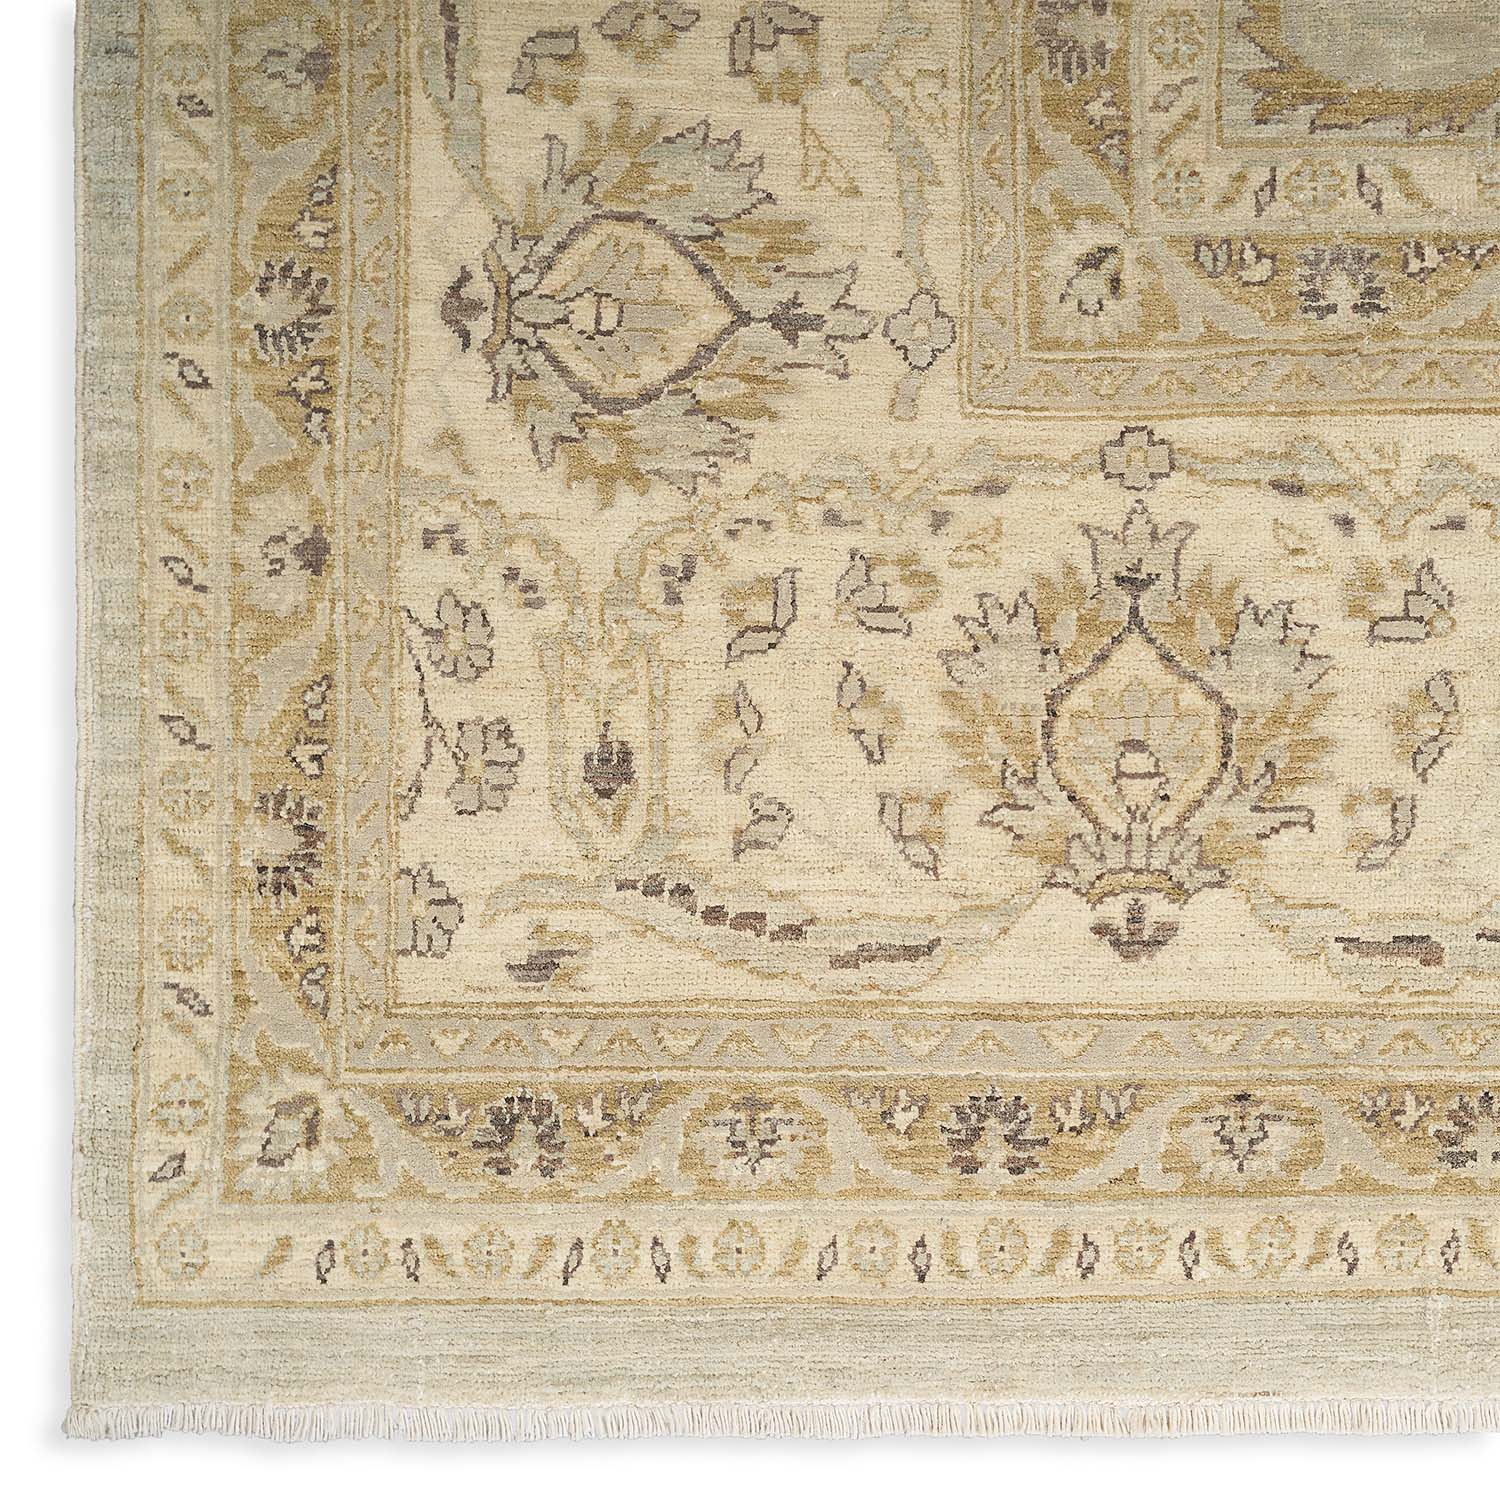 Exquisite hand-knotted vintage carpet featuring intricate botanical and geometric patterns.